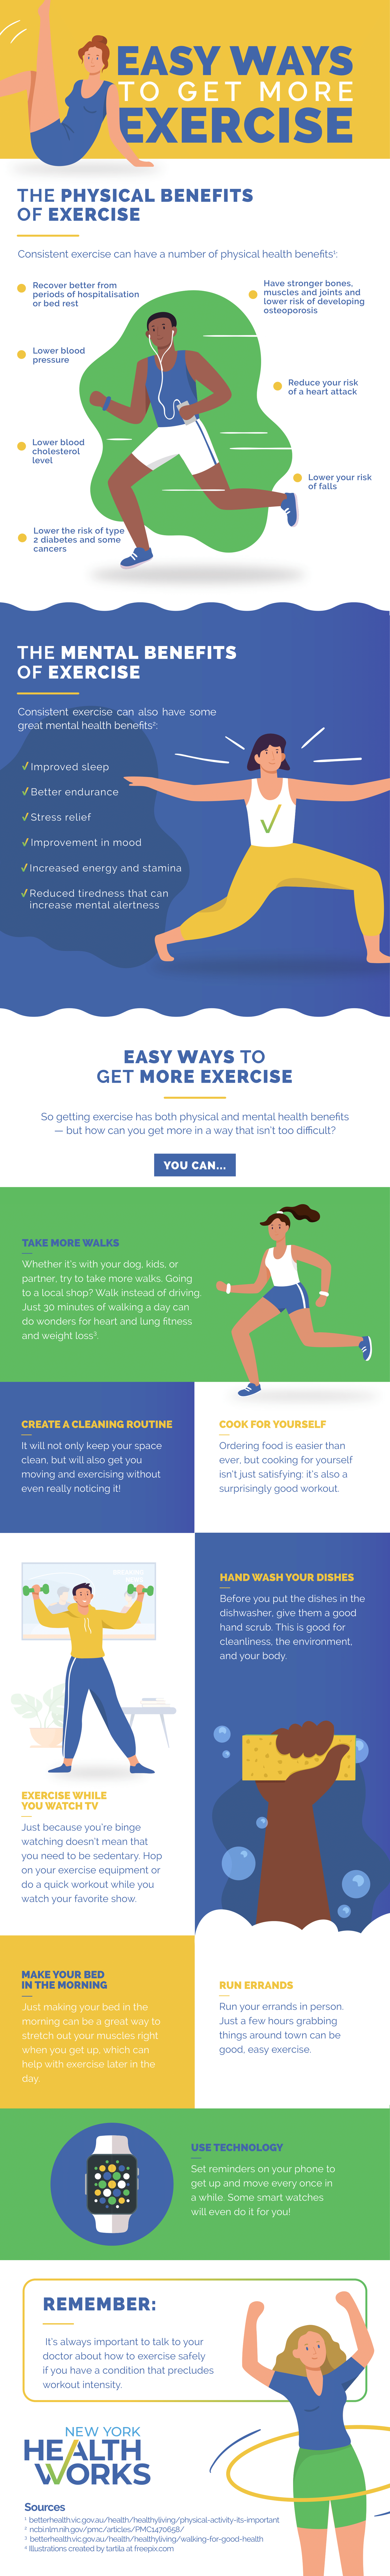 Exercise Infographic 